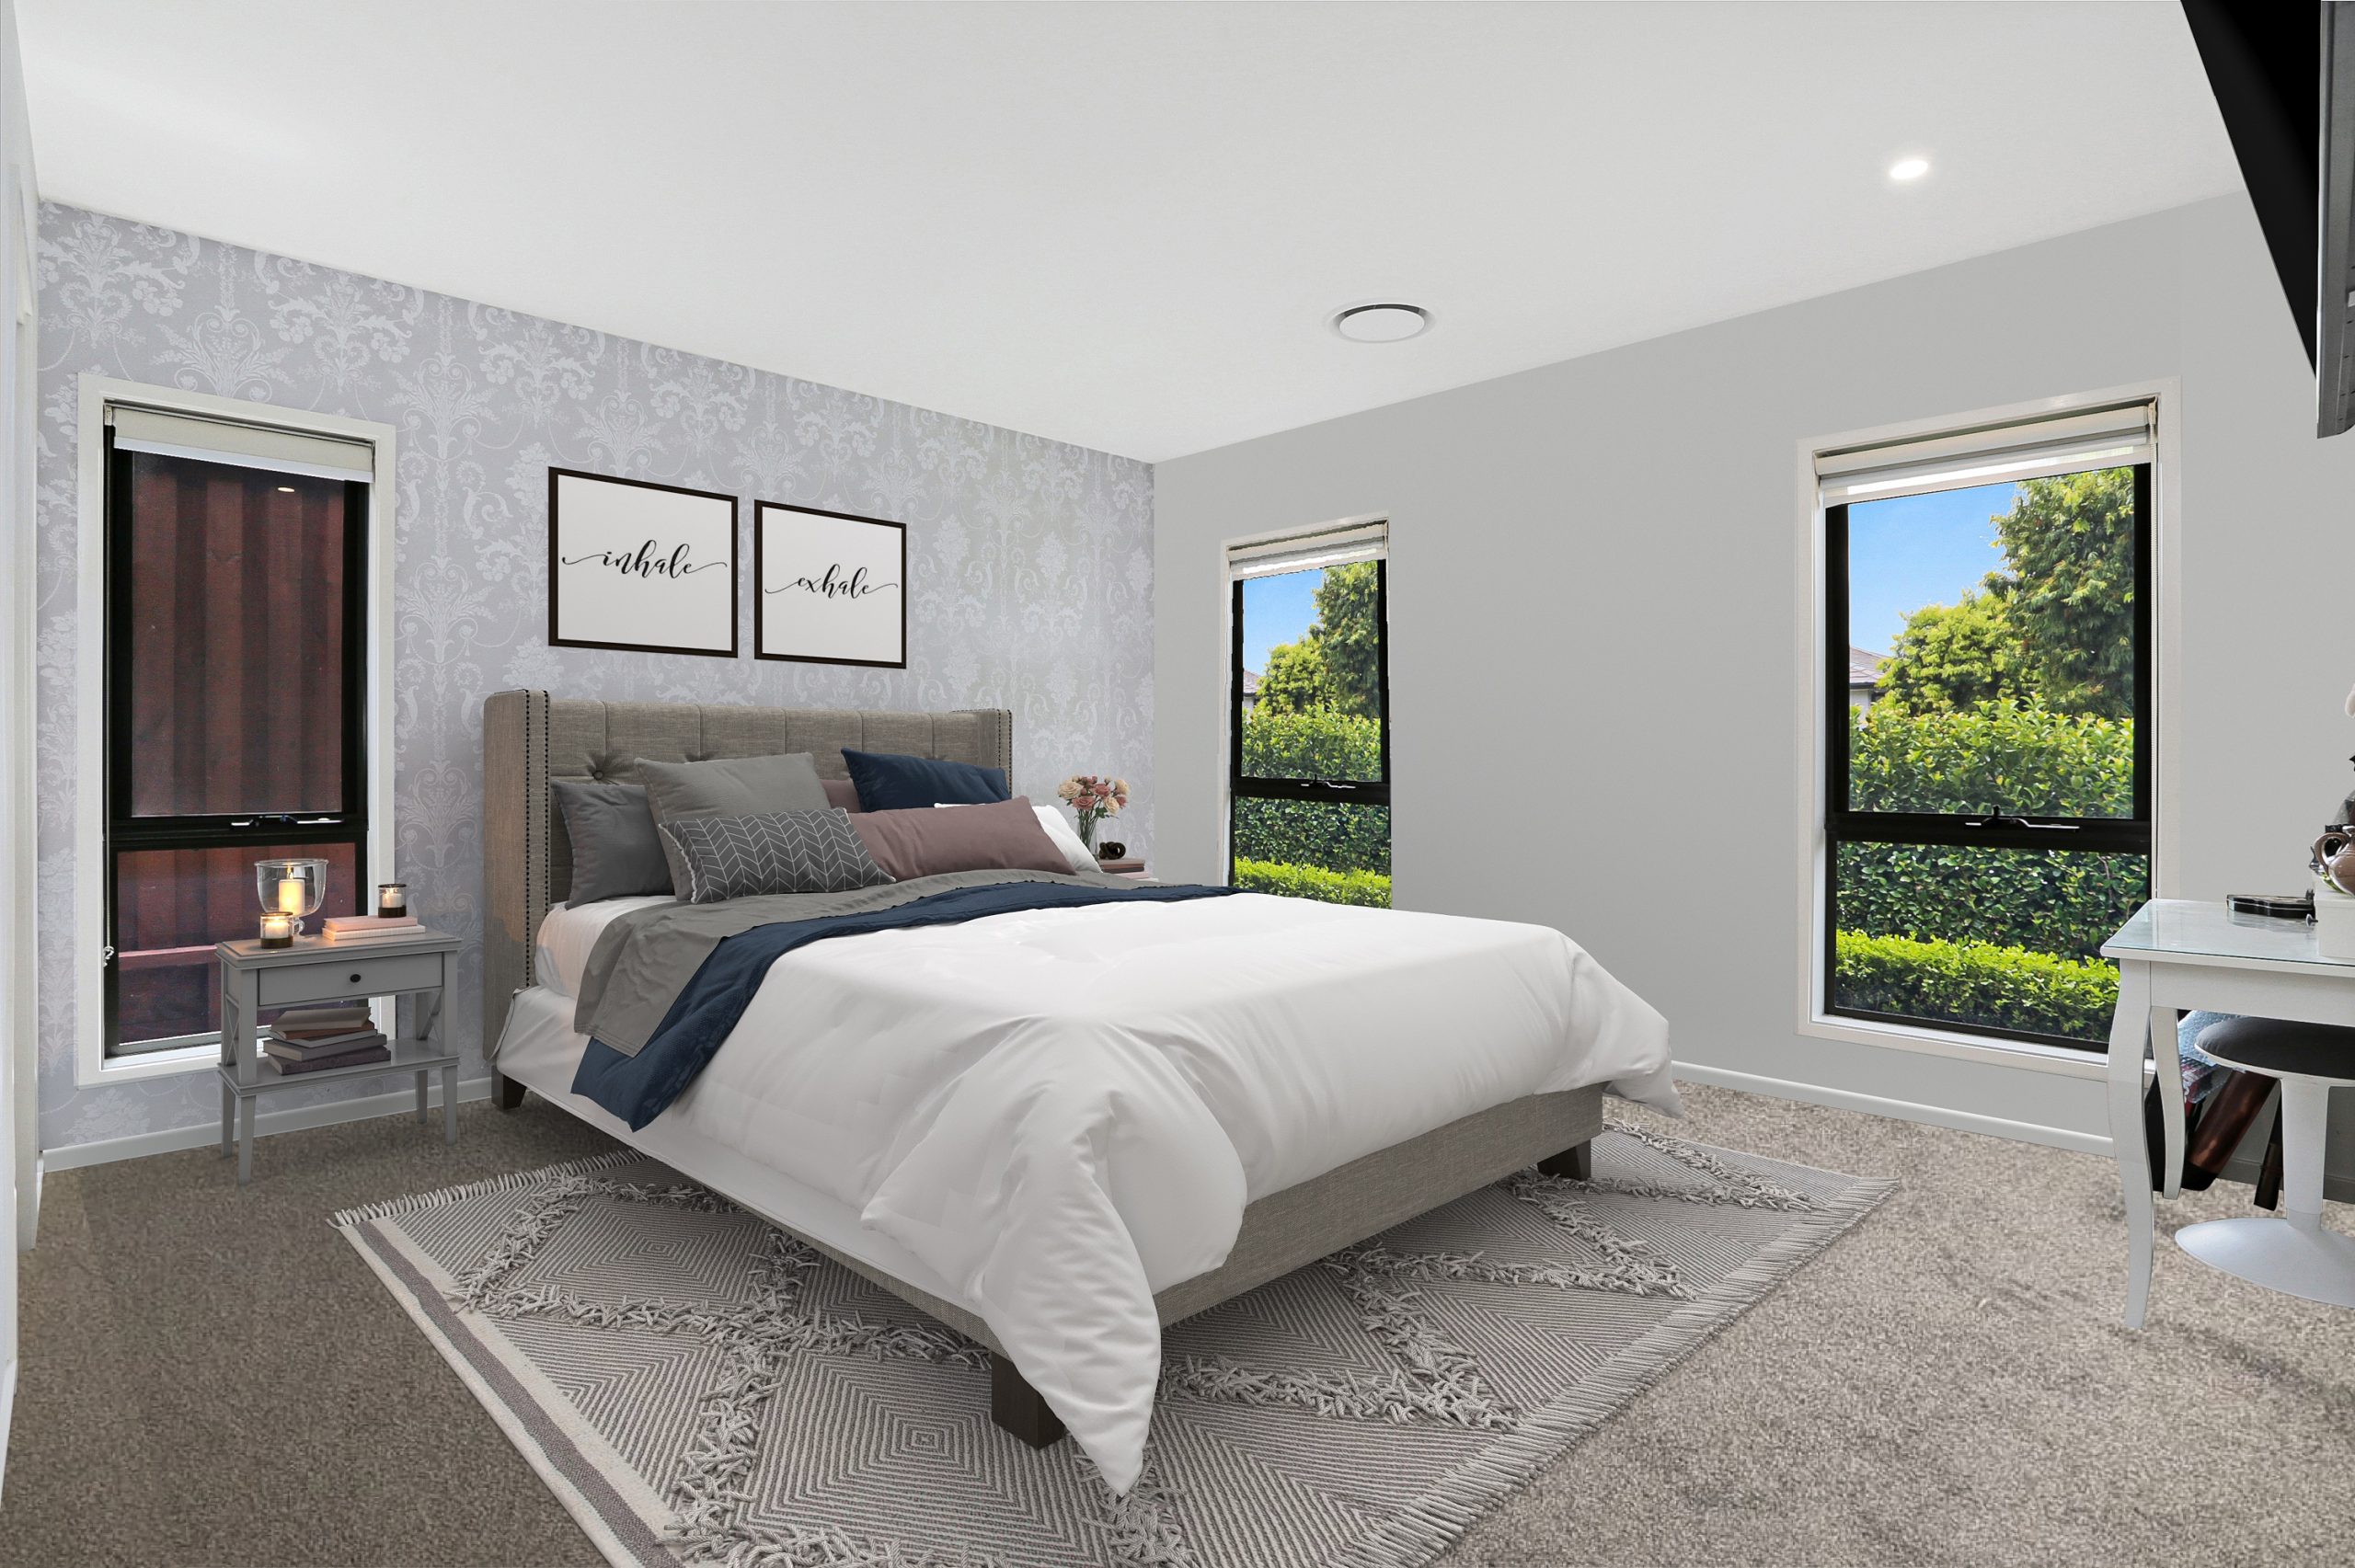 img src="realestatephotoediting.jpg" alt="a tidy and beautiful bedroom after virtual staging"